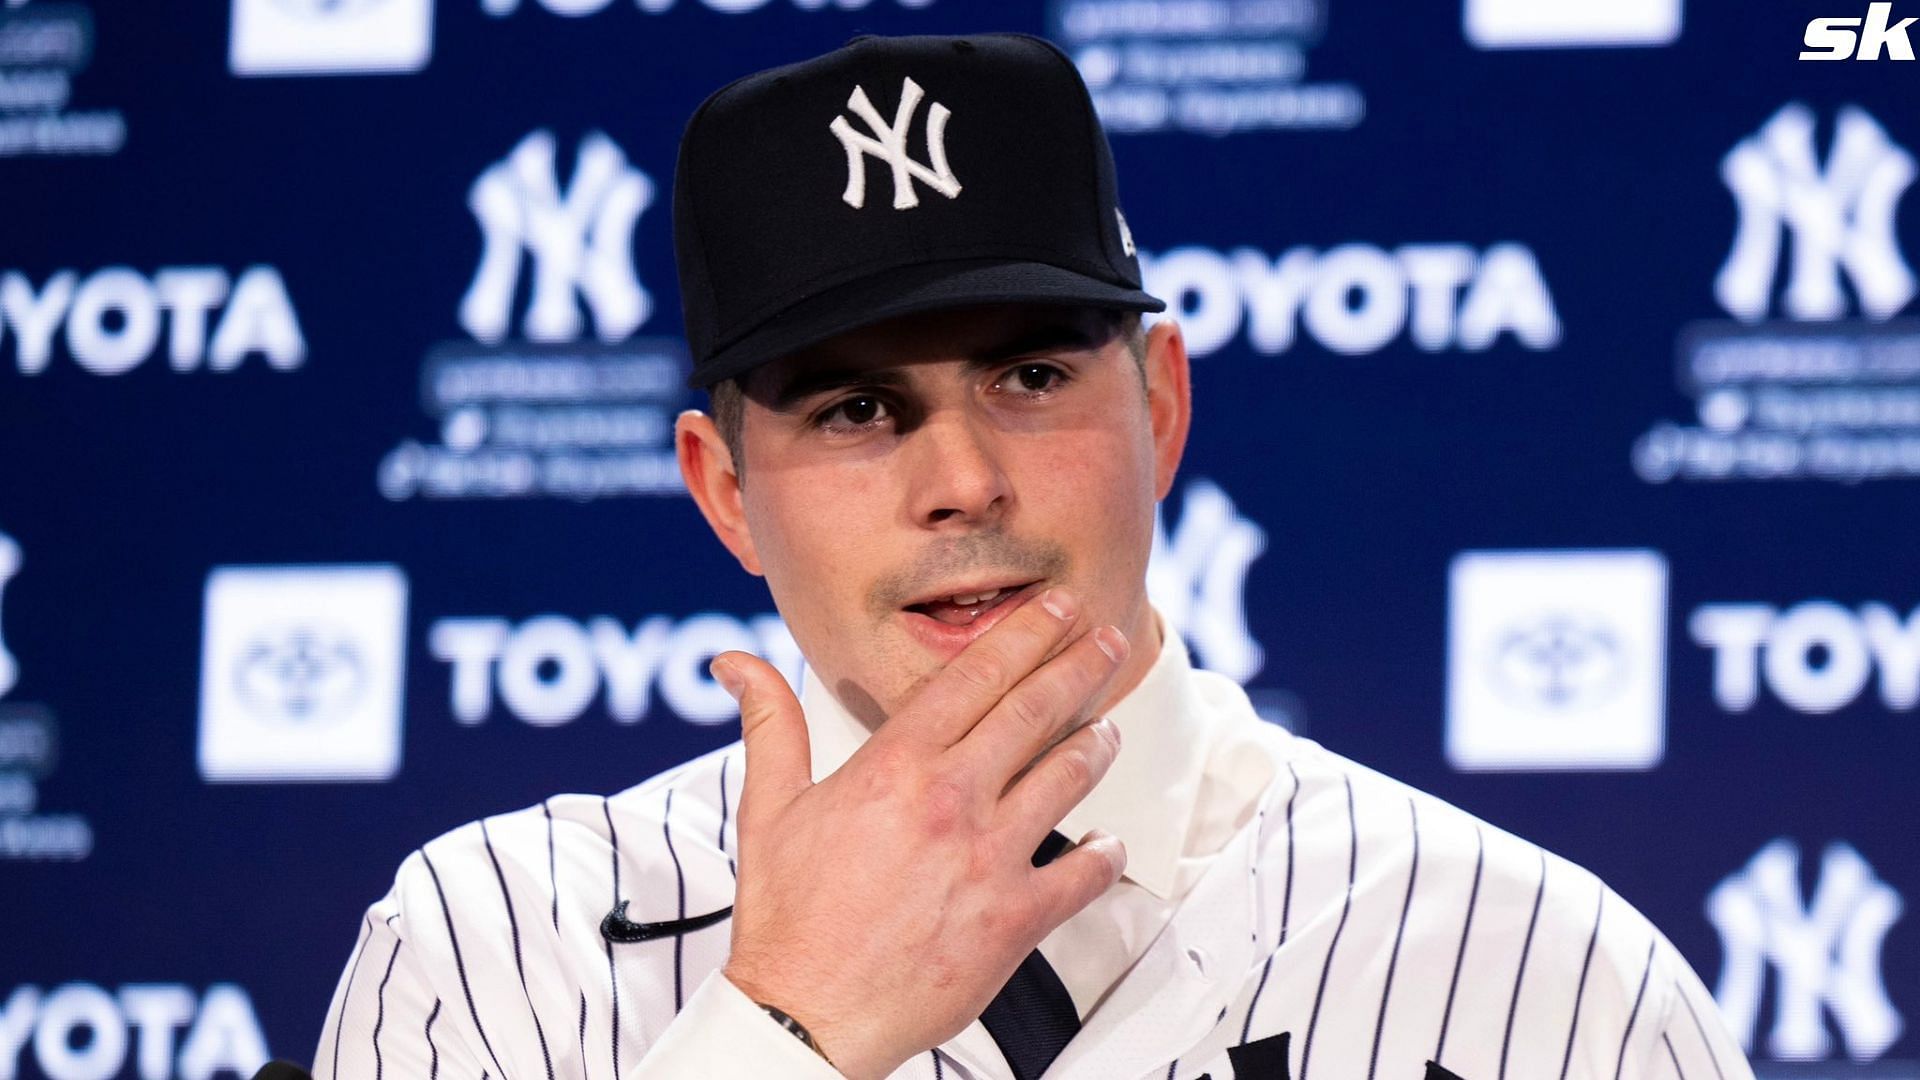 Carlos Rodon of the New York Yankees (Source: Twitter)